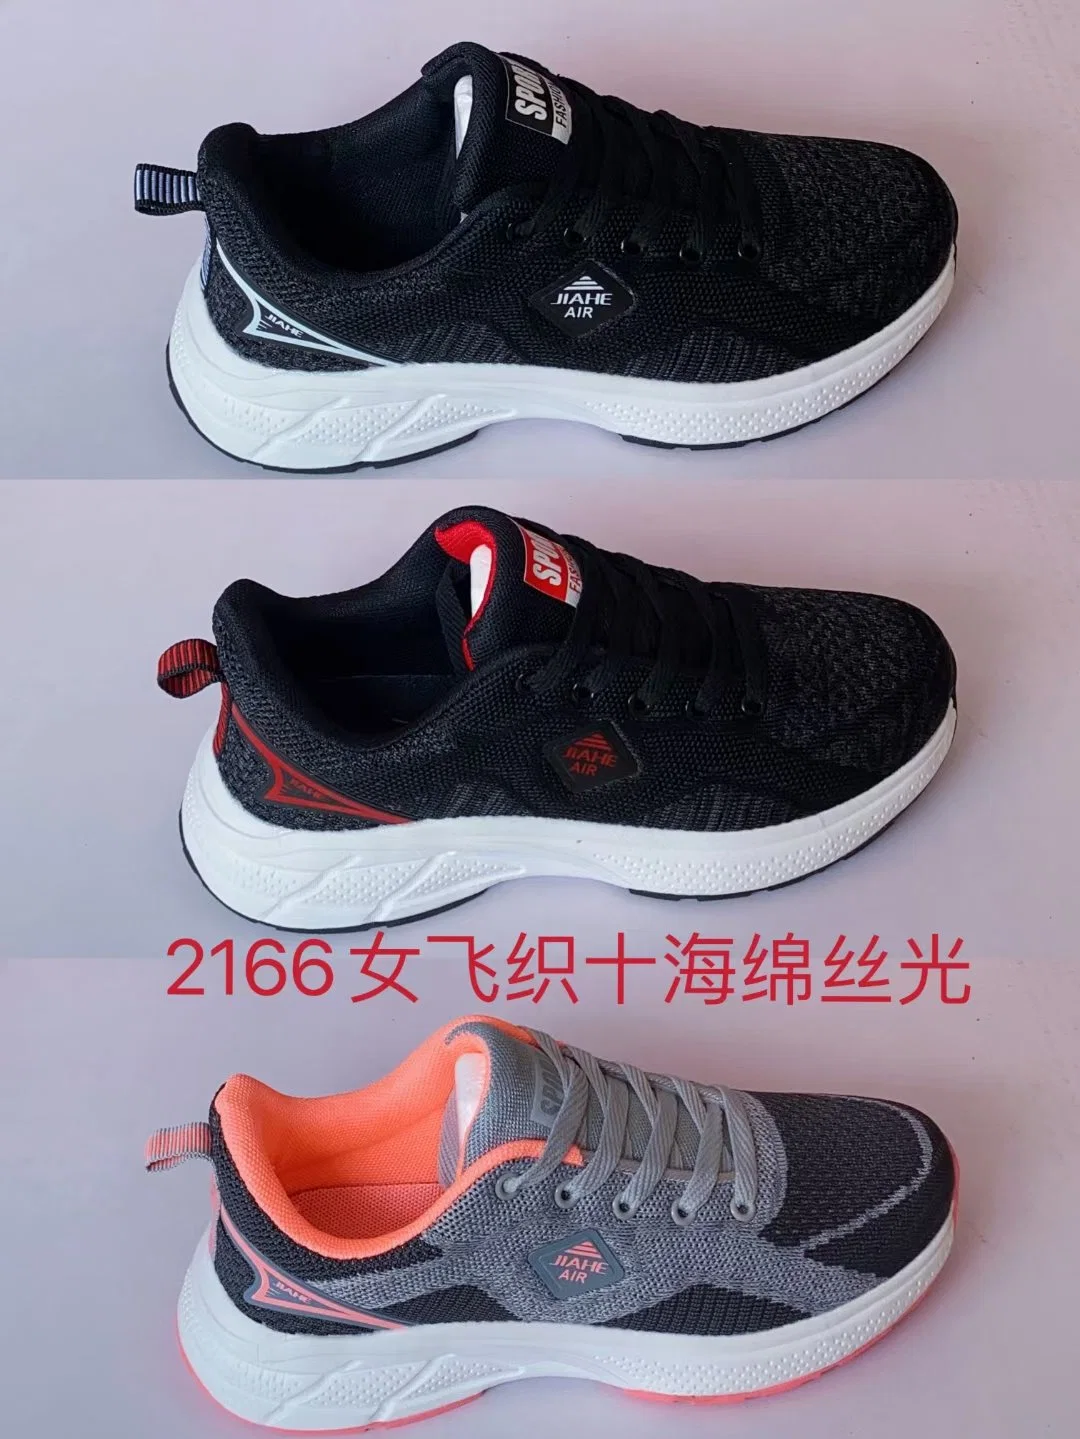 New Style Fashion Special Design Men and Women Footwear Shoes, China Manufacture High quality/High cost performance  Comfortable Breathable Casual Shoes Running Leisure Shoes